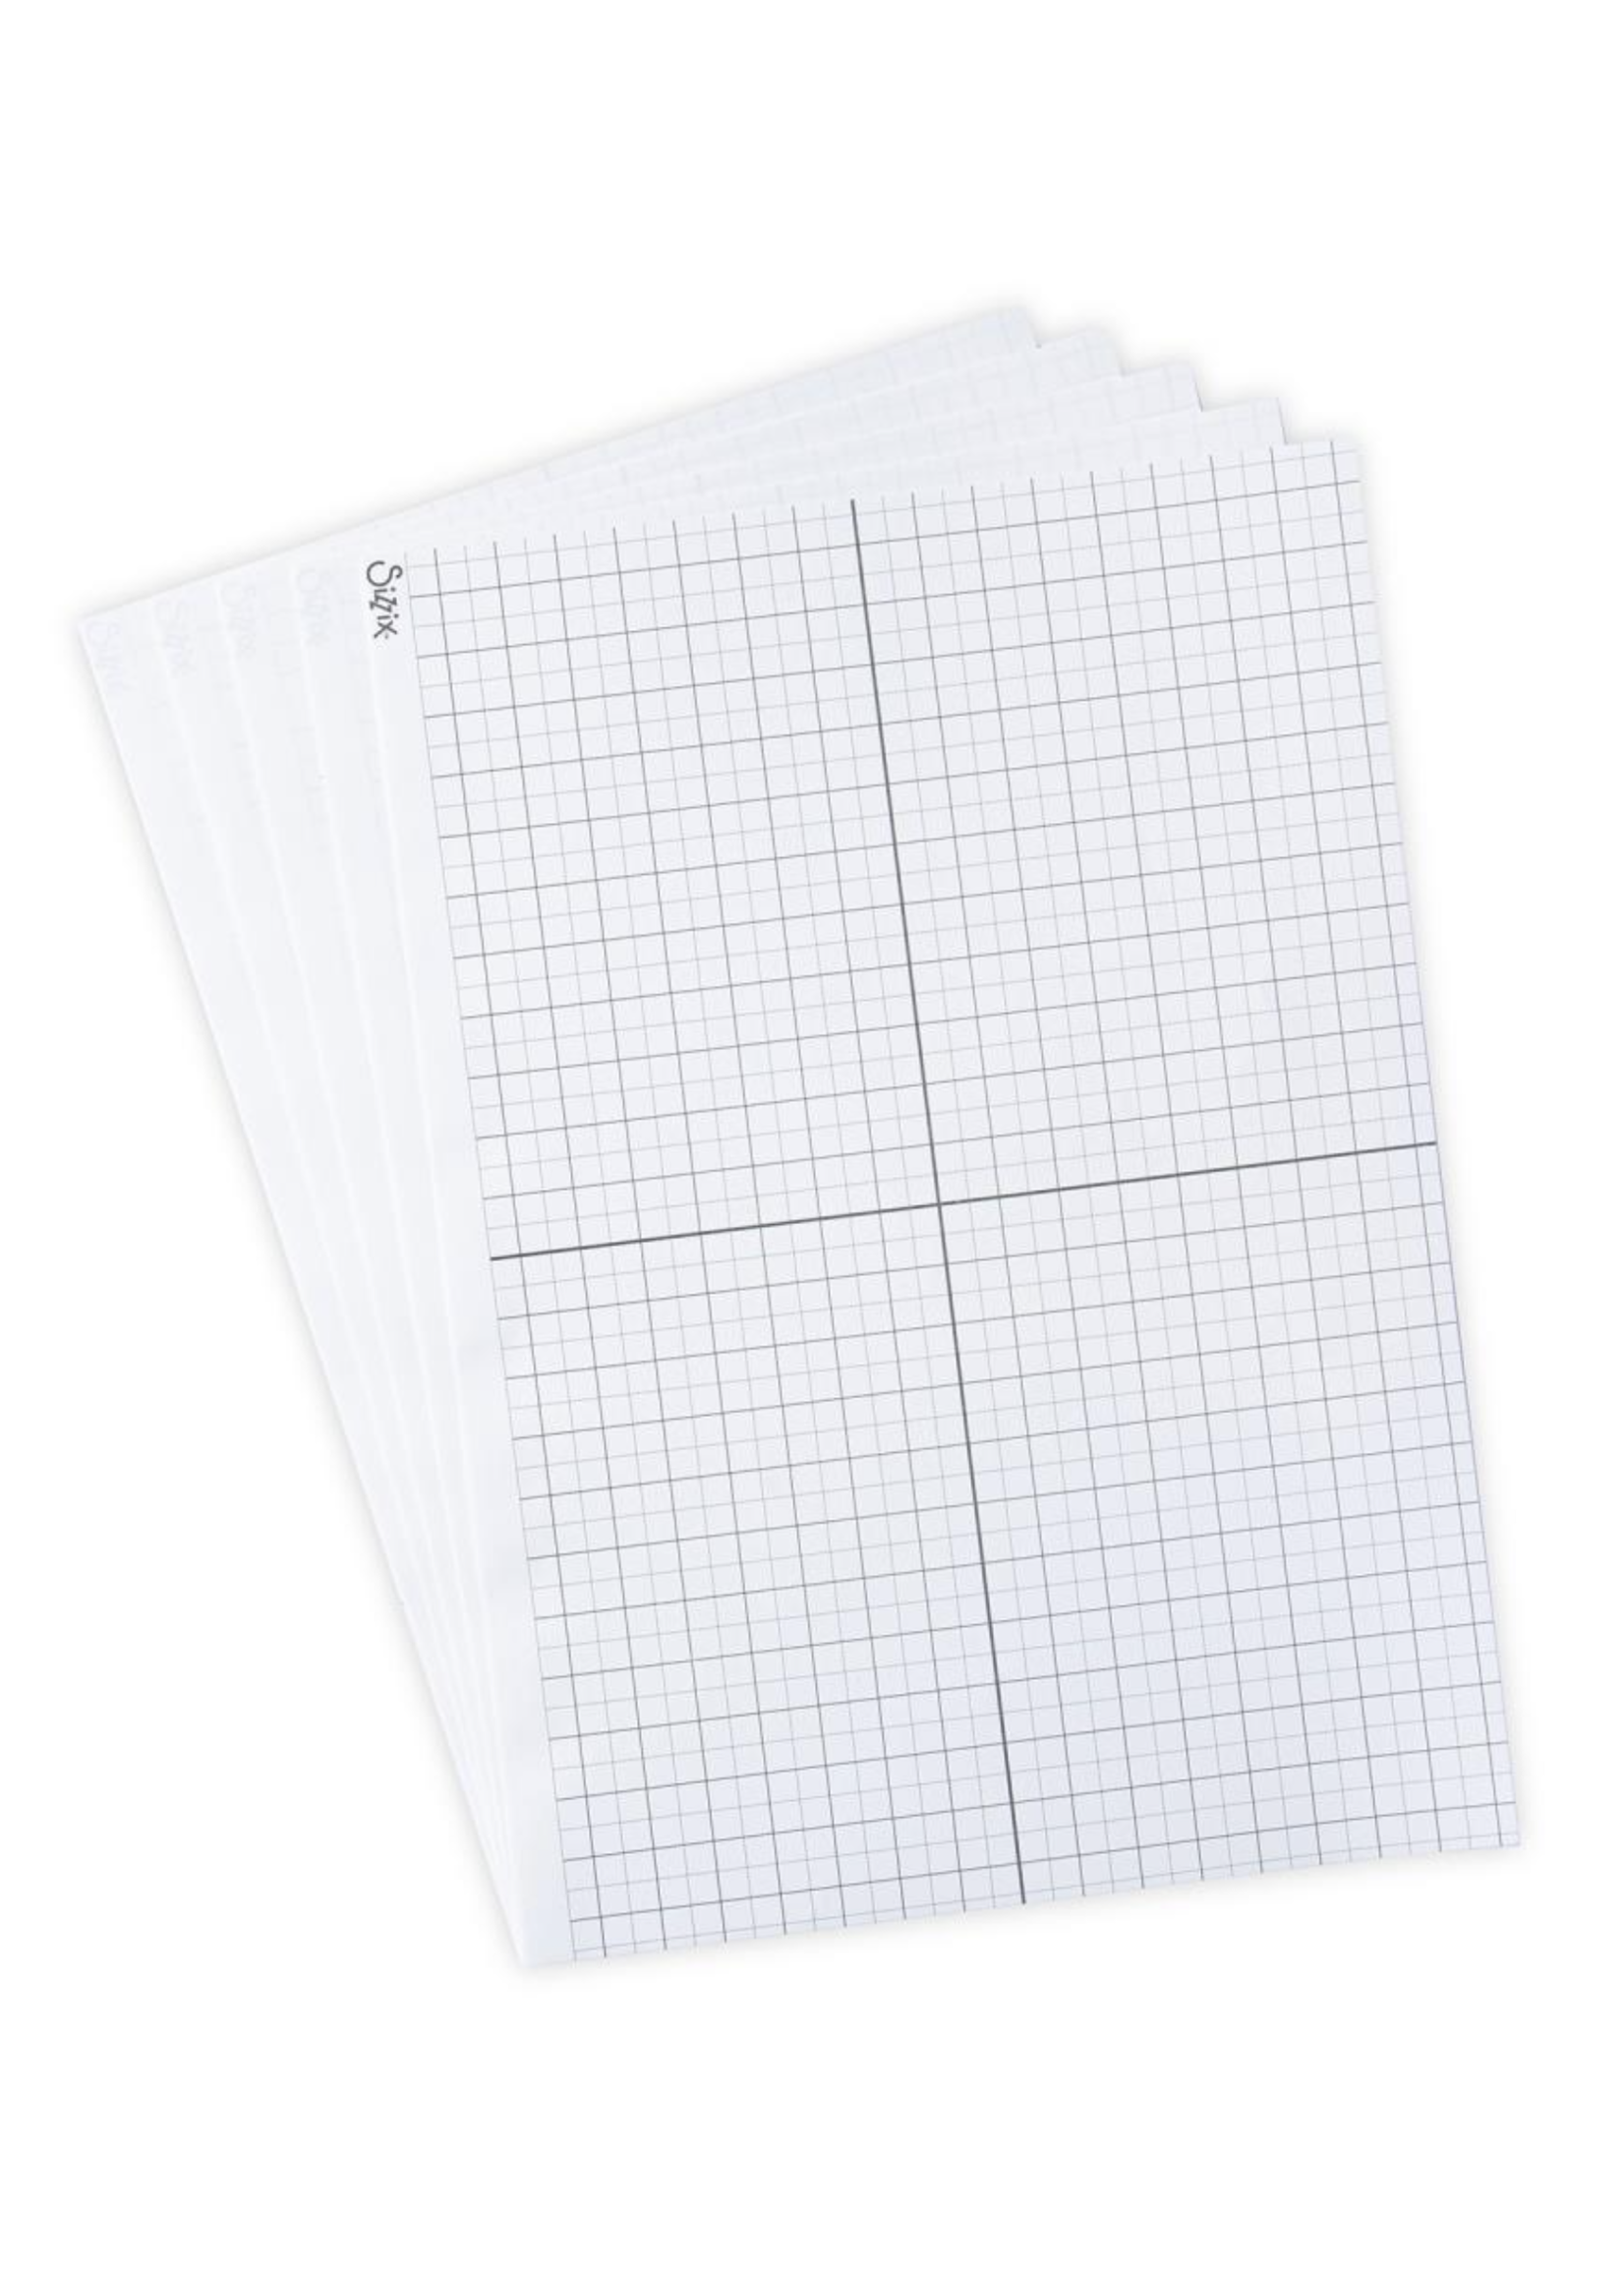 Sizzix Sizzix™ Accessory - Sticky Grid Sheets, 8 1/4" x 11 5/8", 5 Pack (stamp & stencil tool refill)